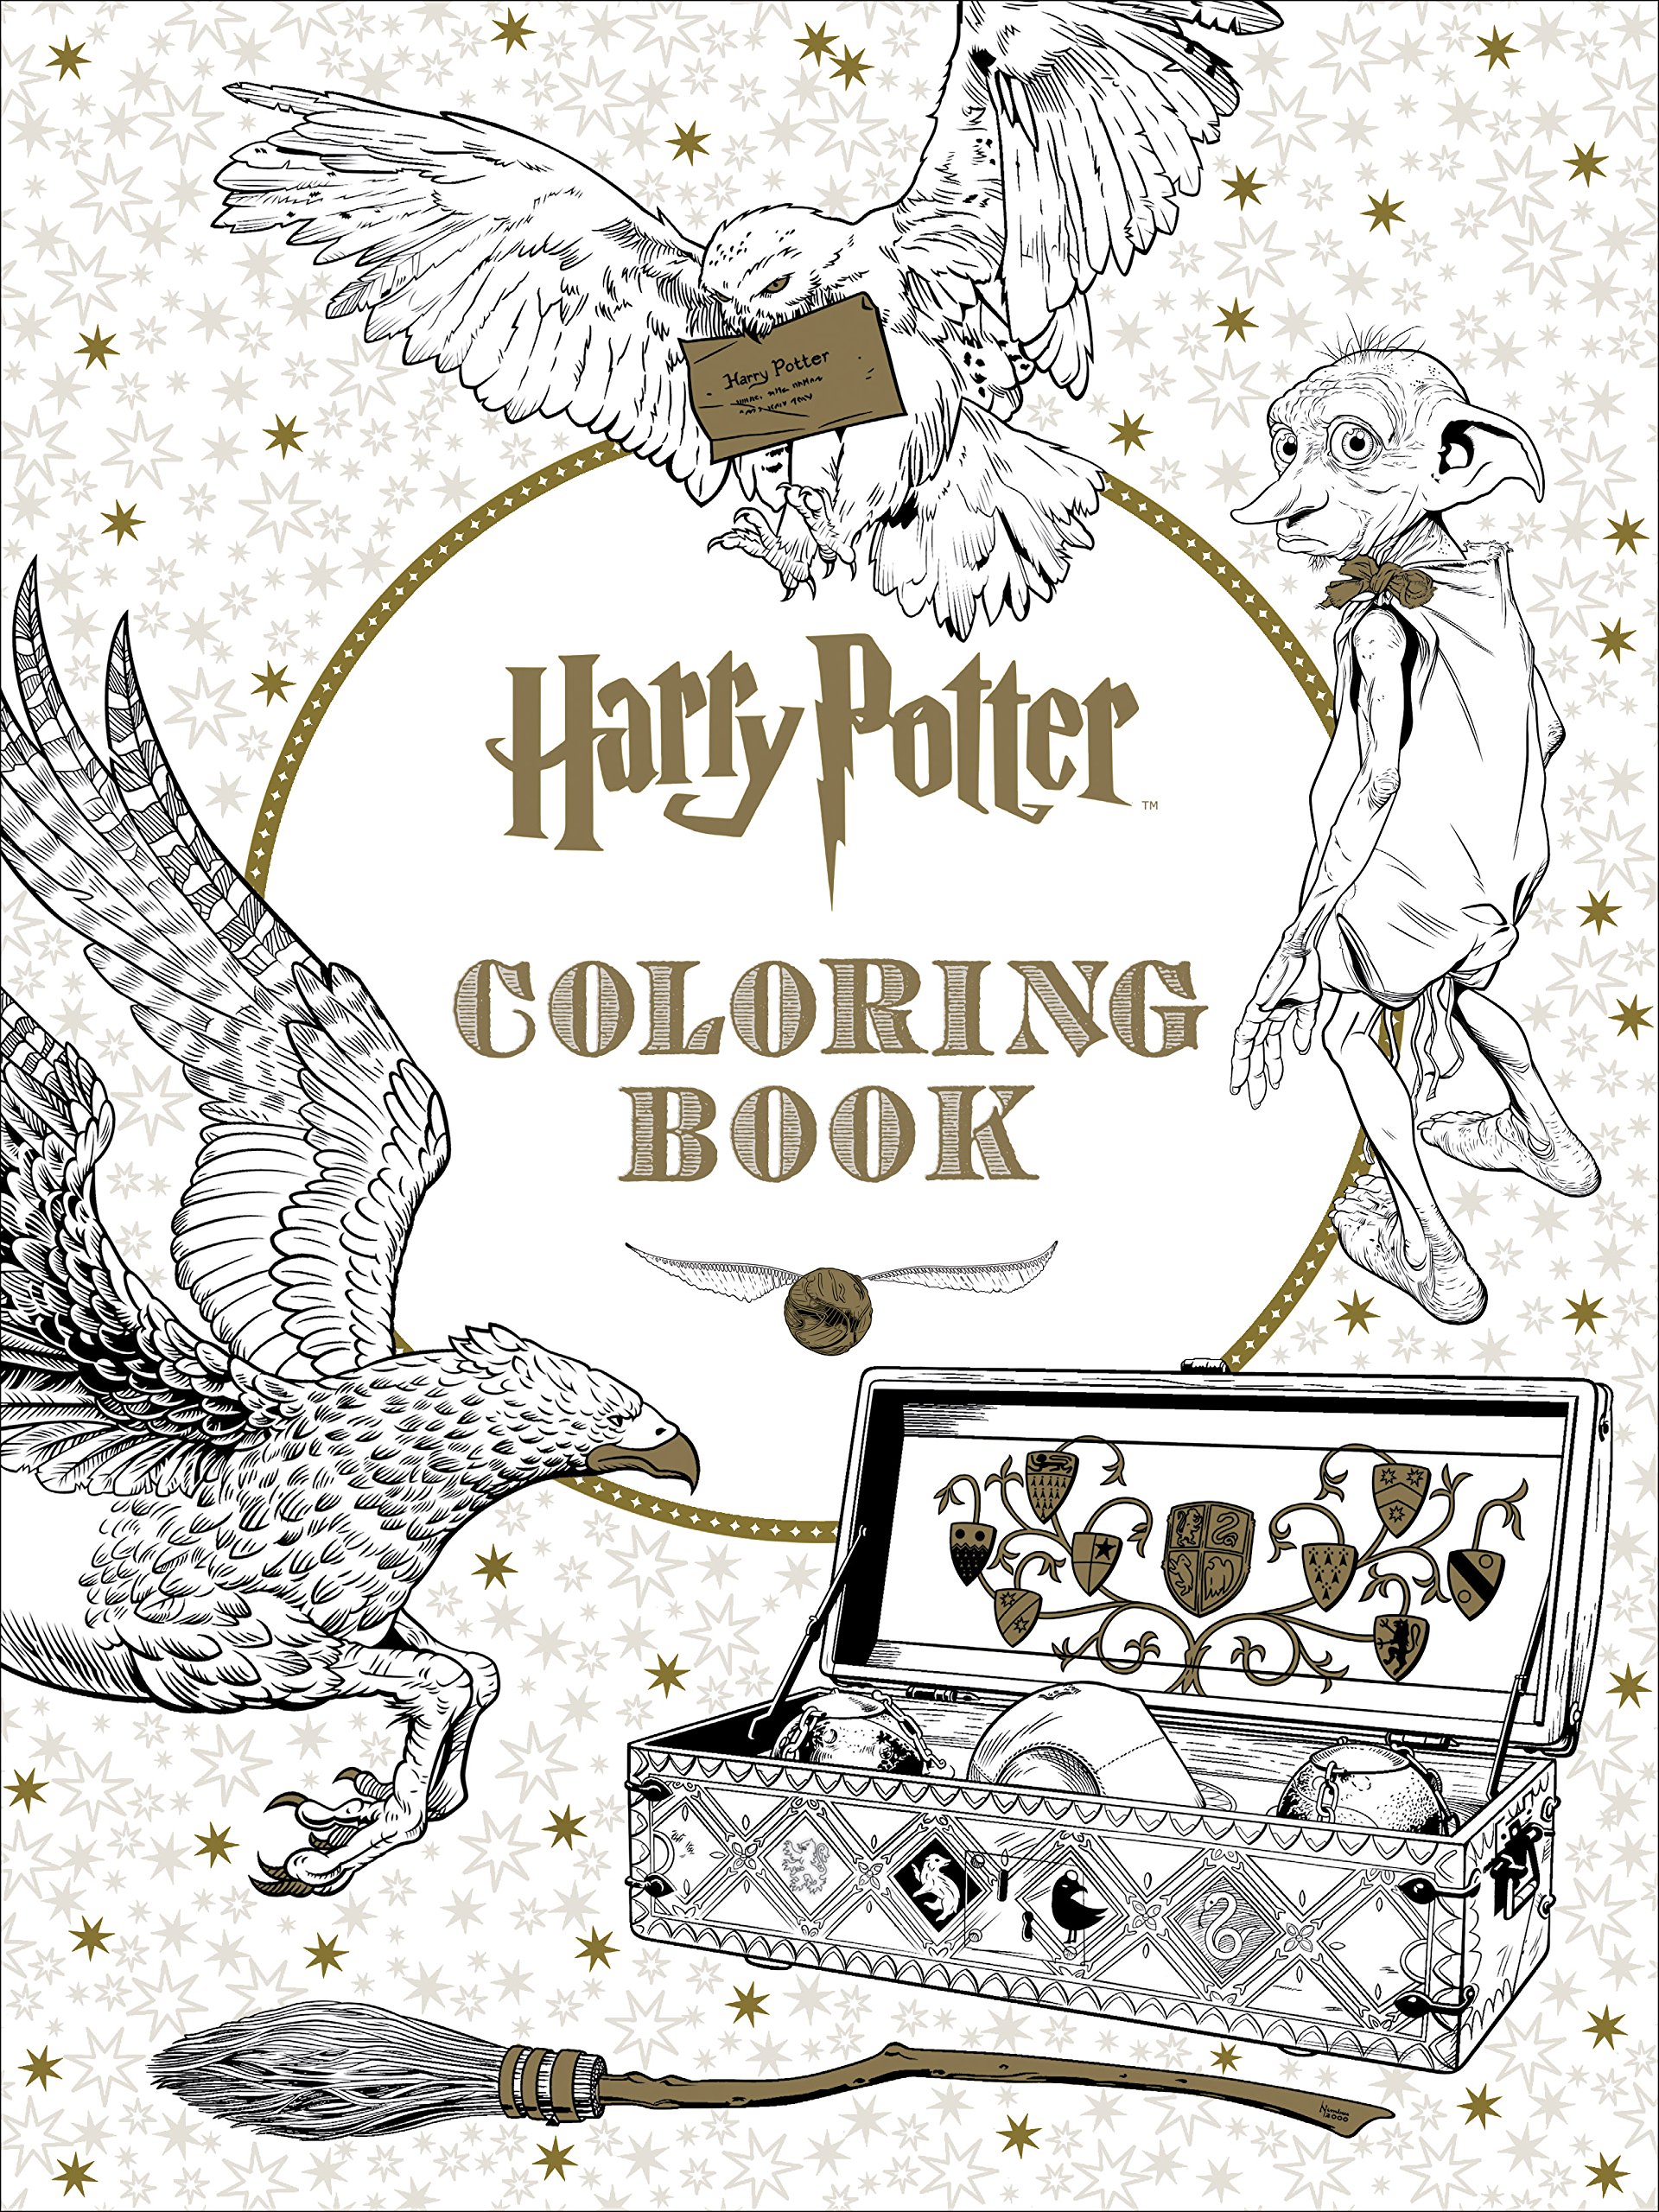  'Harry Potter: The Coloring Book' is out next month. – AFP Relaxnews pic, October 11, 2015.